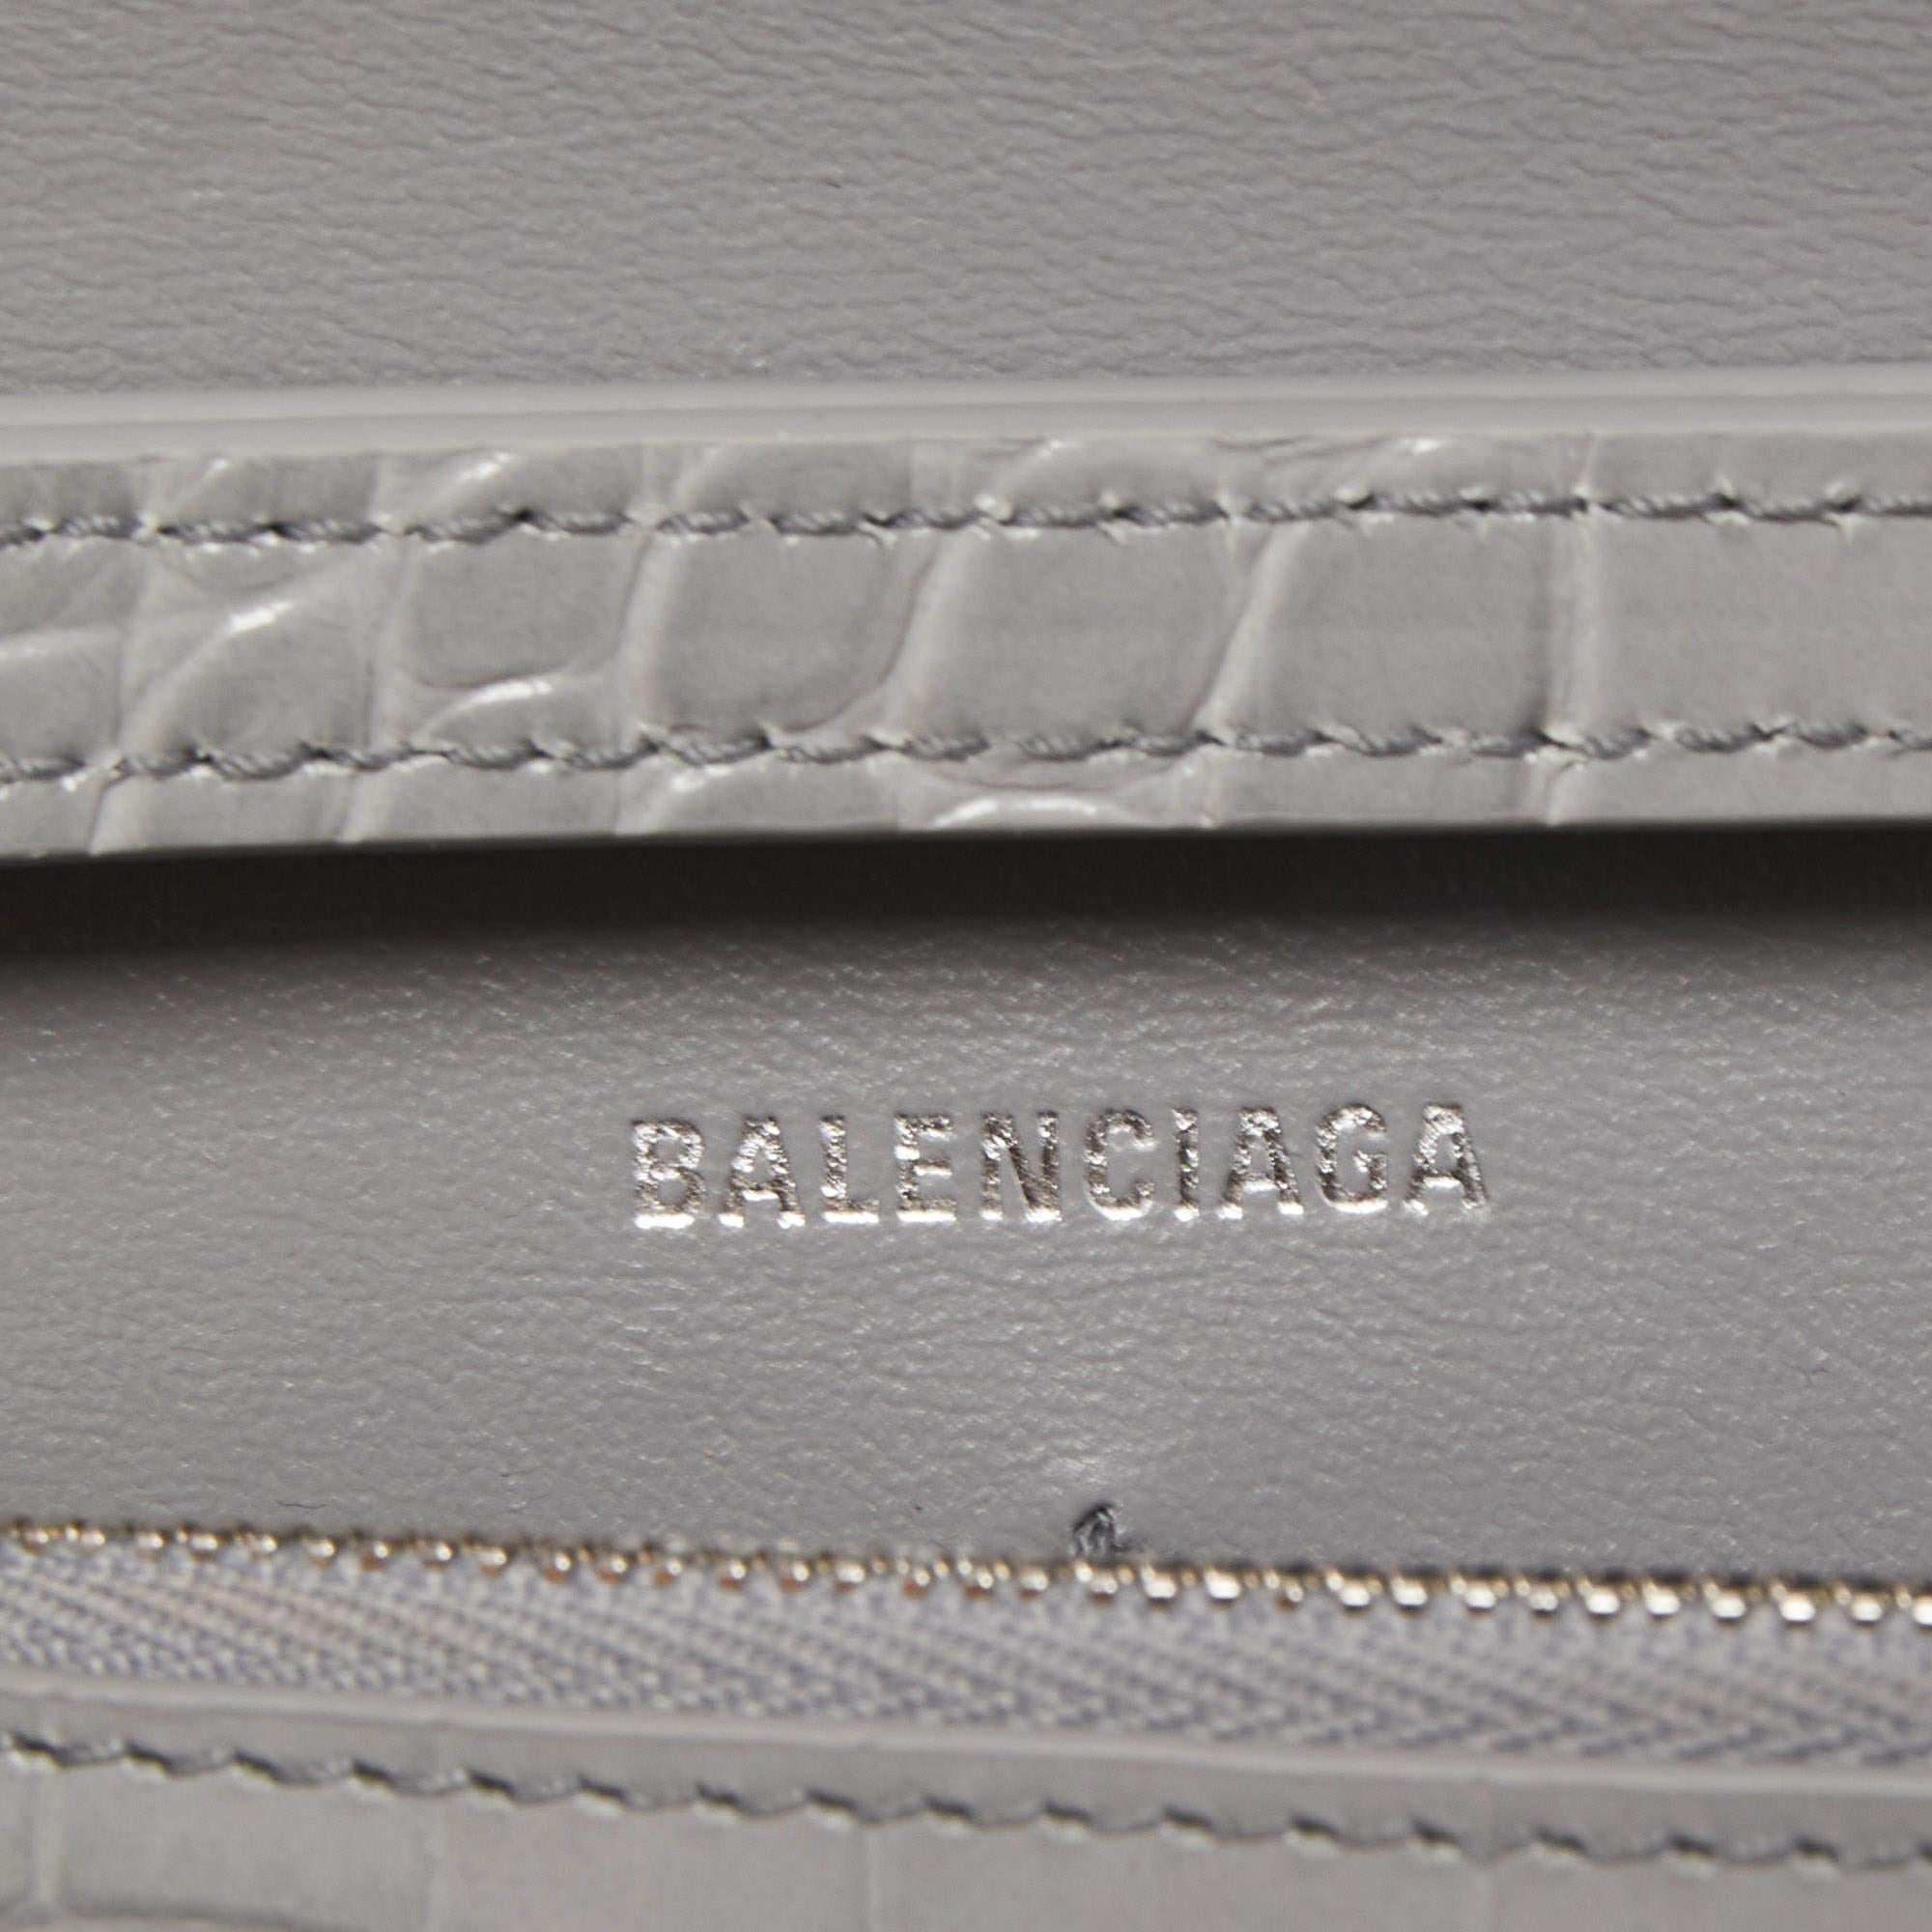 Balenciaga Grey Croc Embossed Leather Hourglass Wallet on Chain 5